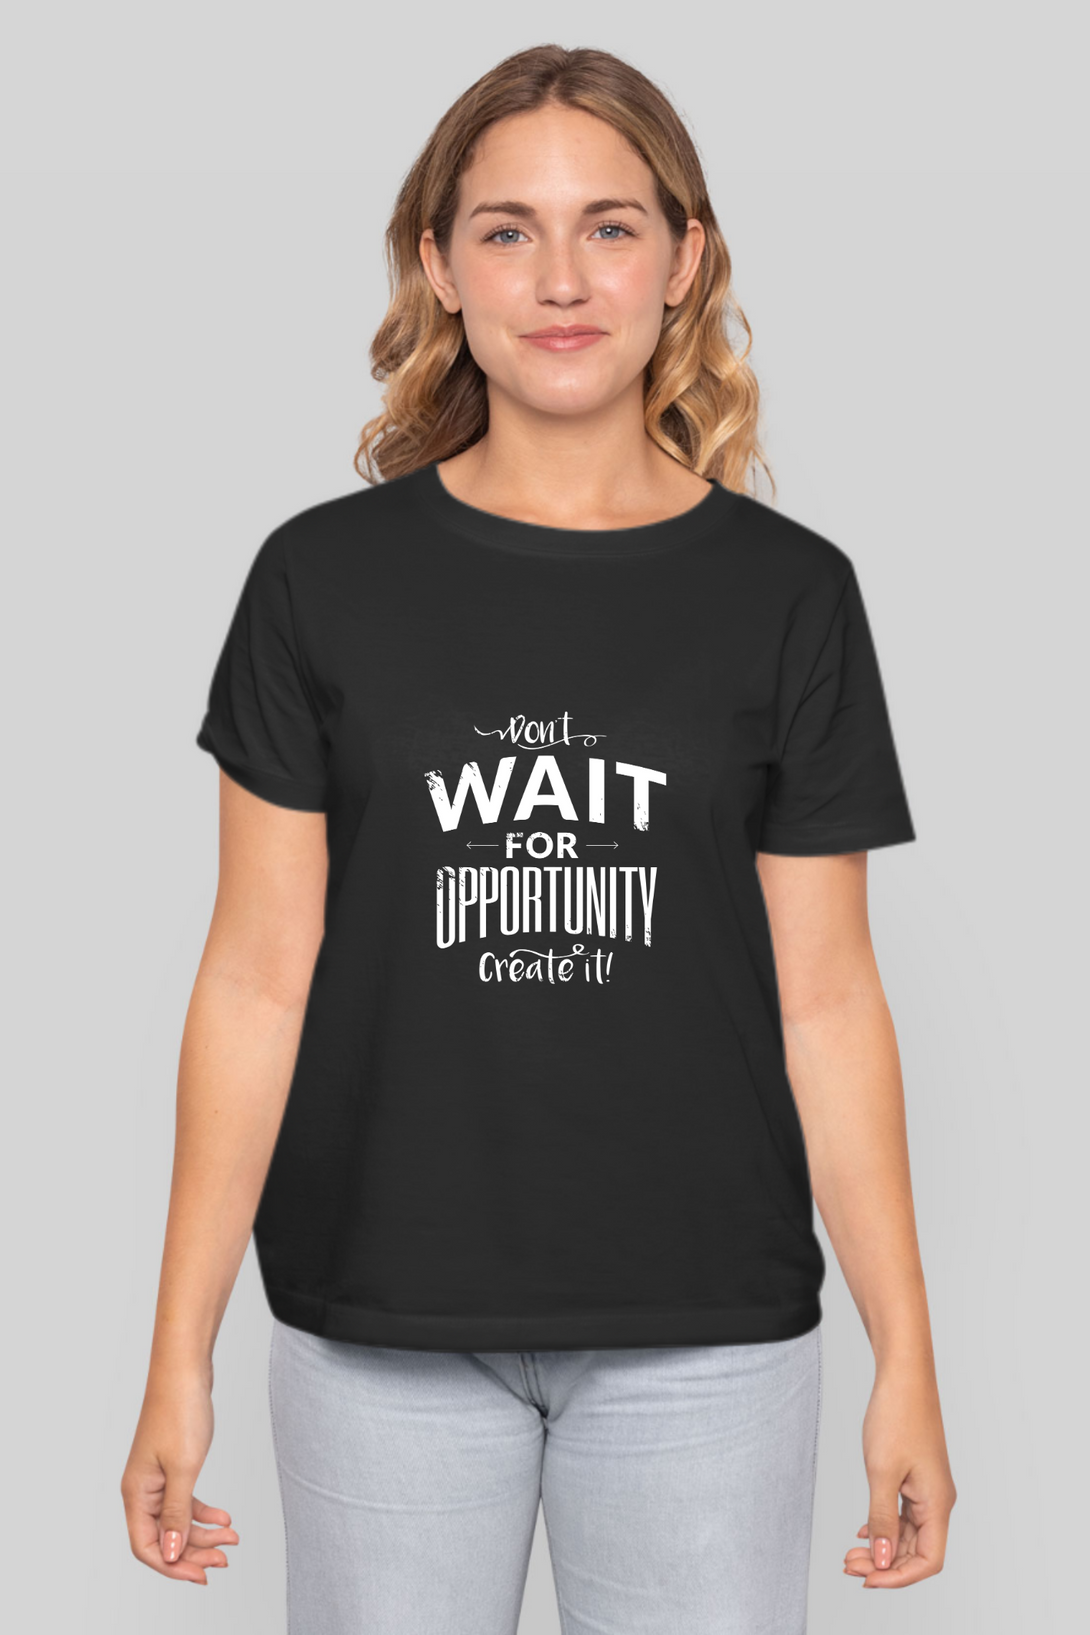 Create Opportunity Printed T-Shirt For Women - WowWaves - 10